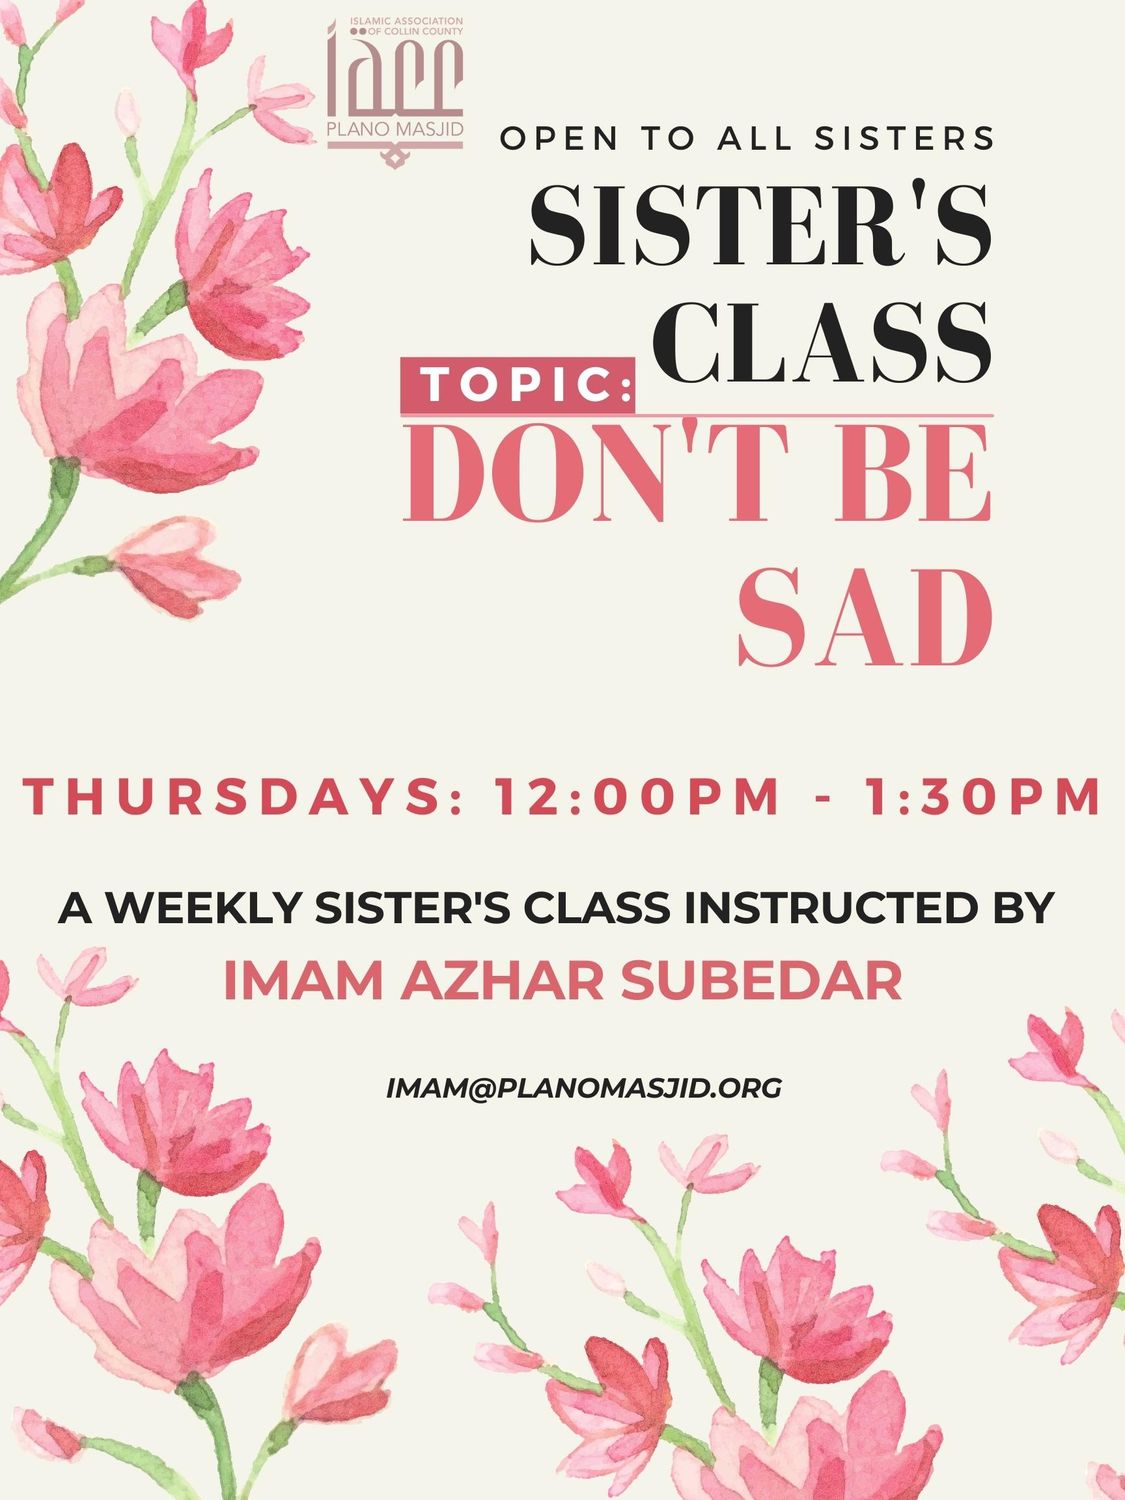 Sisters Class - Don't Be Sad